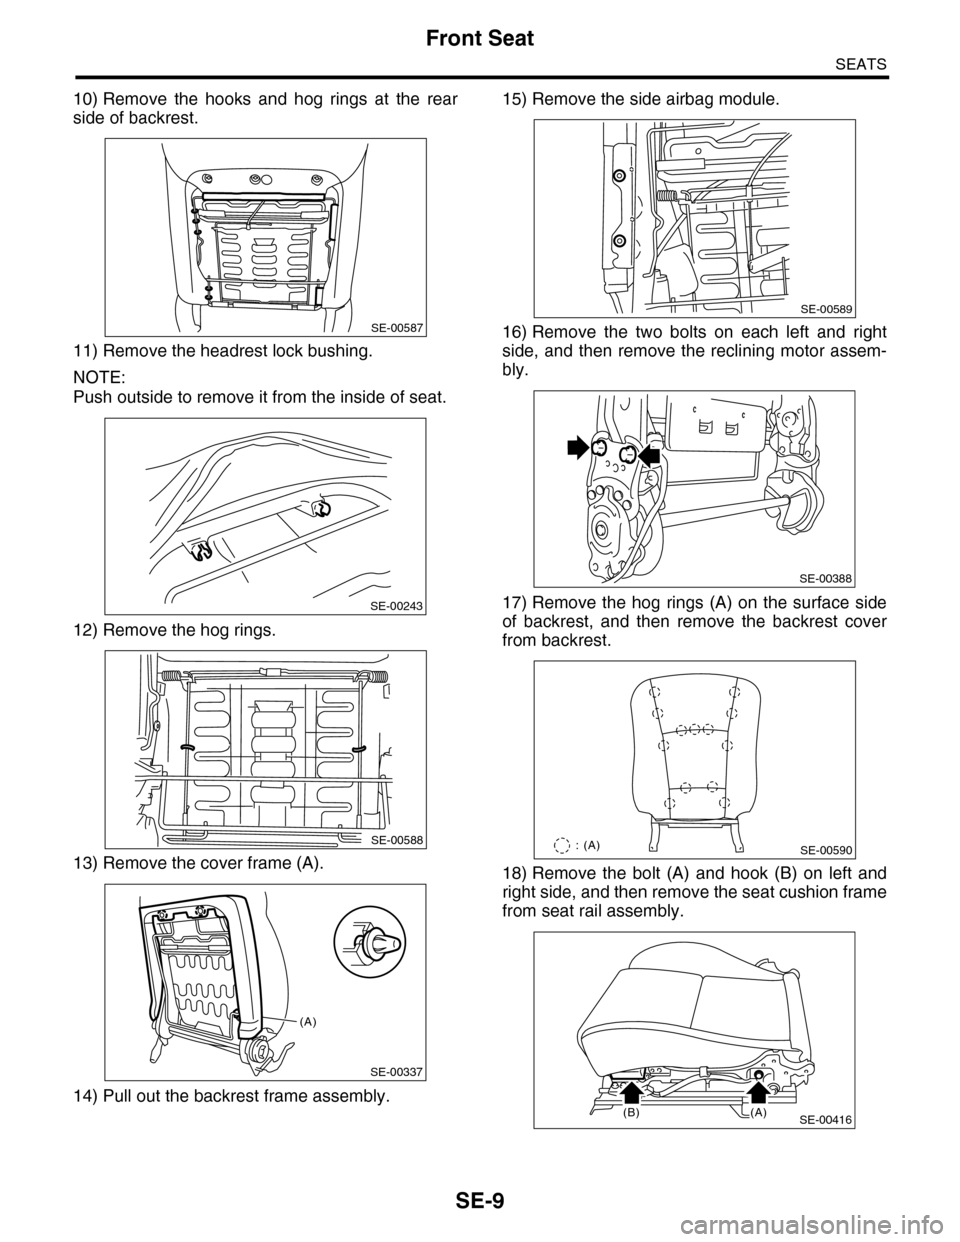 SUBARU TRIBECA 2009 1.G Service Workshop Manual SE-9
Front Seat
SEATS
10) Remove  the  hooks  and  hog  rings  at  the  rear
side of backrest.
11) Remove the headrest lock bushing.
NOTE:
Push outside to remove it from the inside of seat.
12) Remove